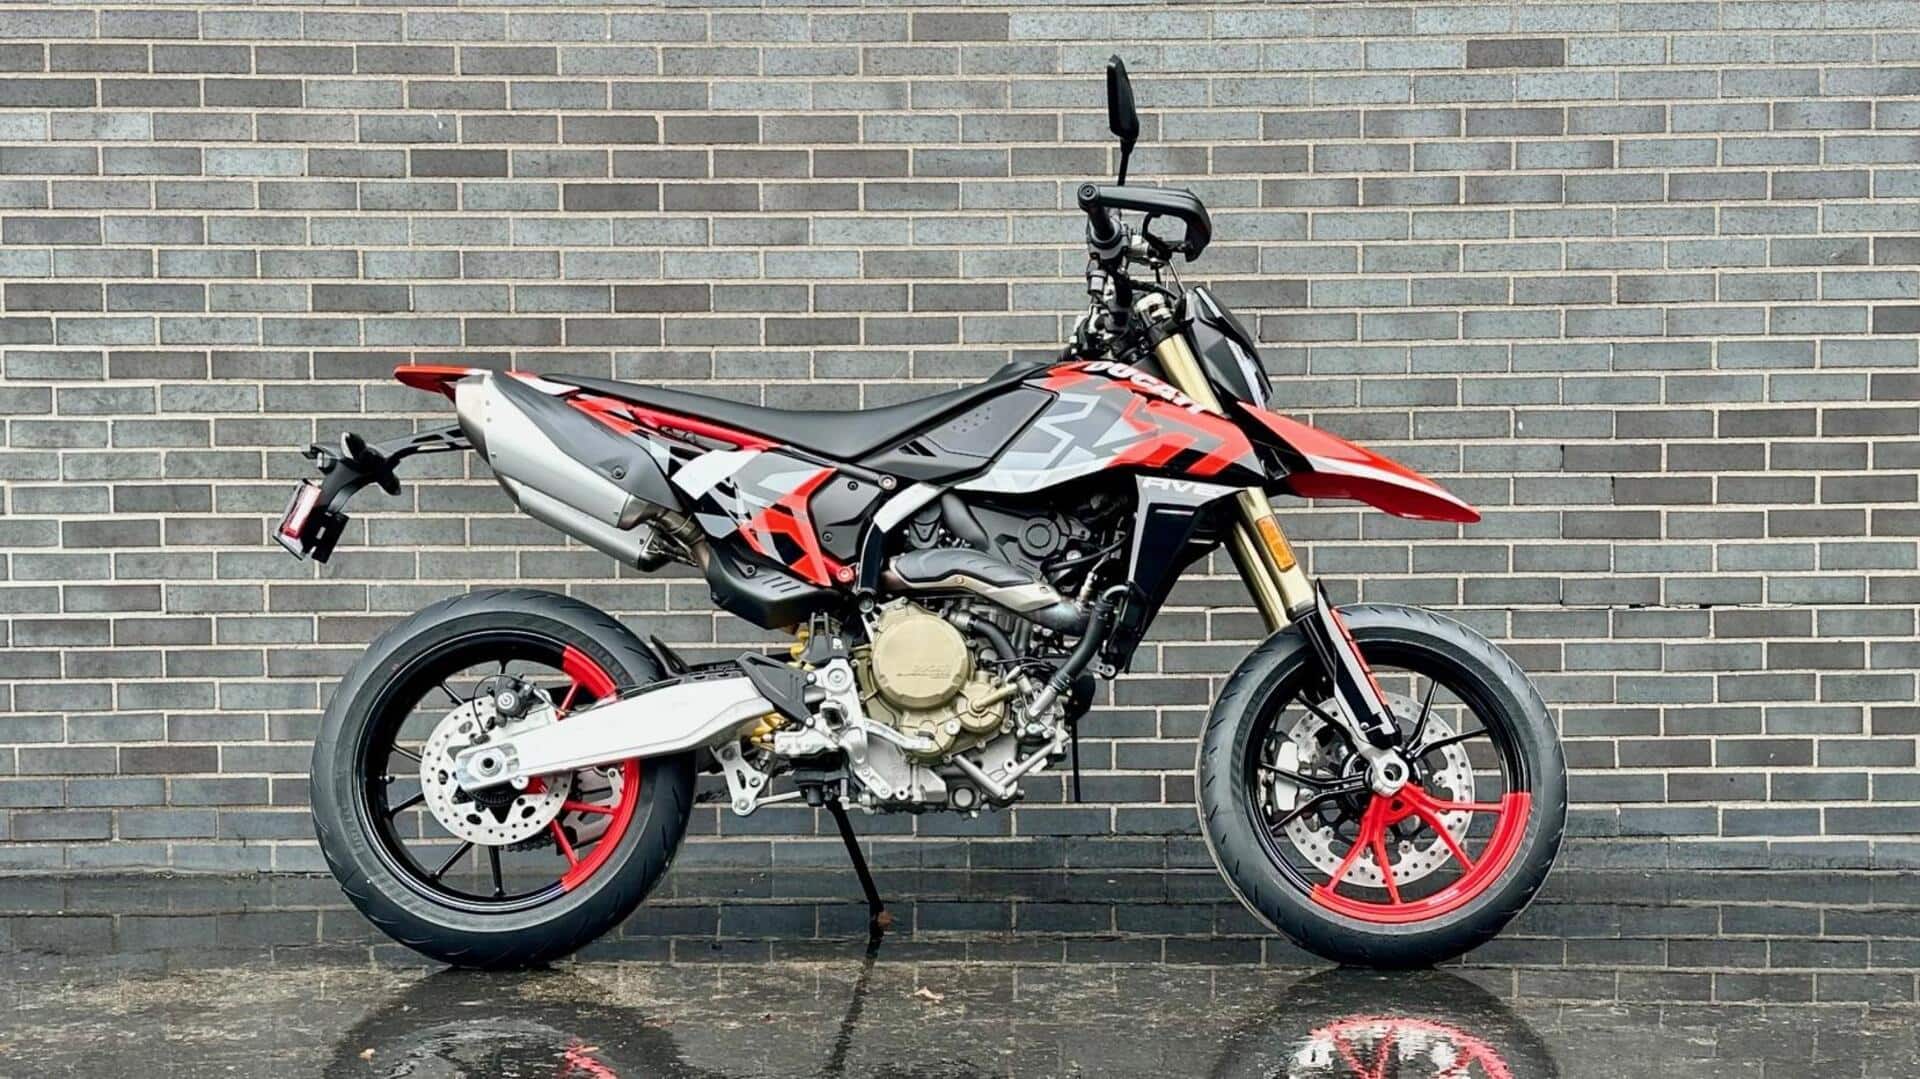 Ducati Hypermotard 698 Mono confirmed for India: What to expect